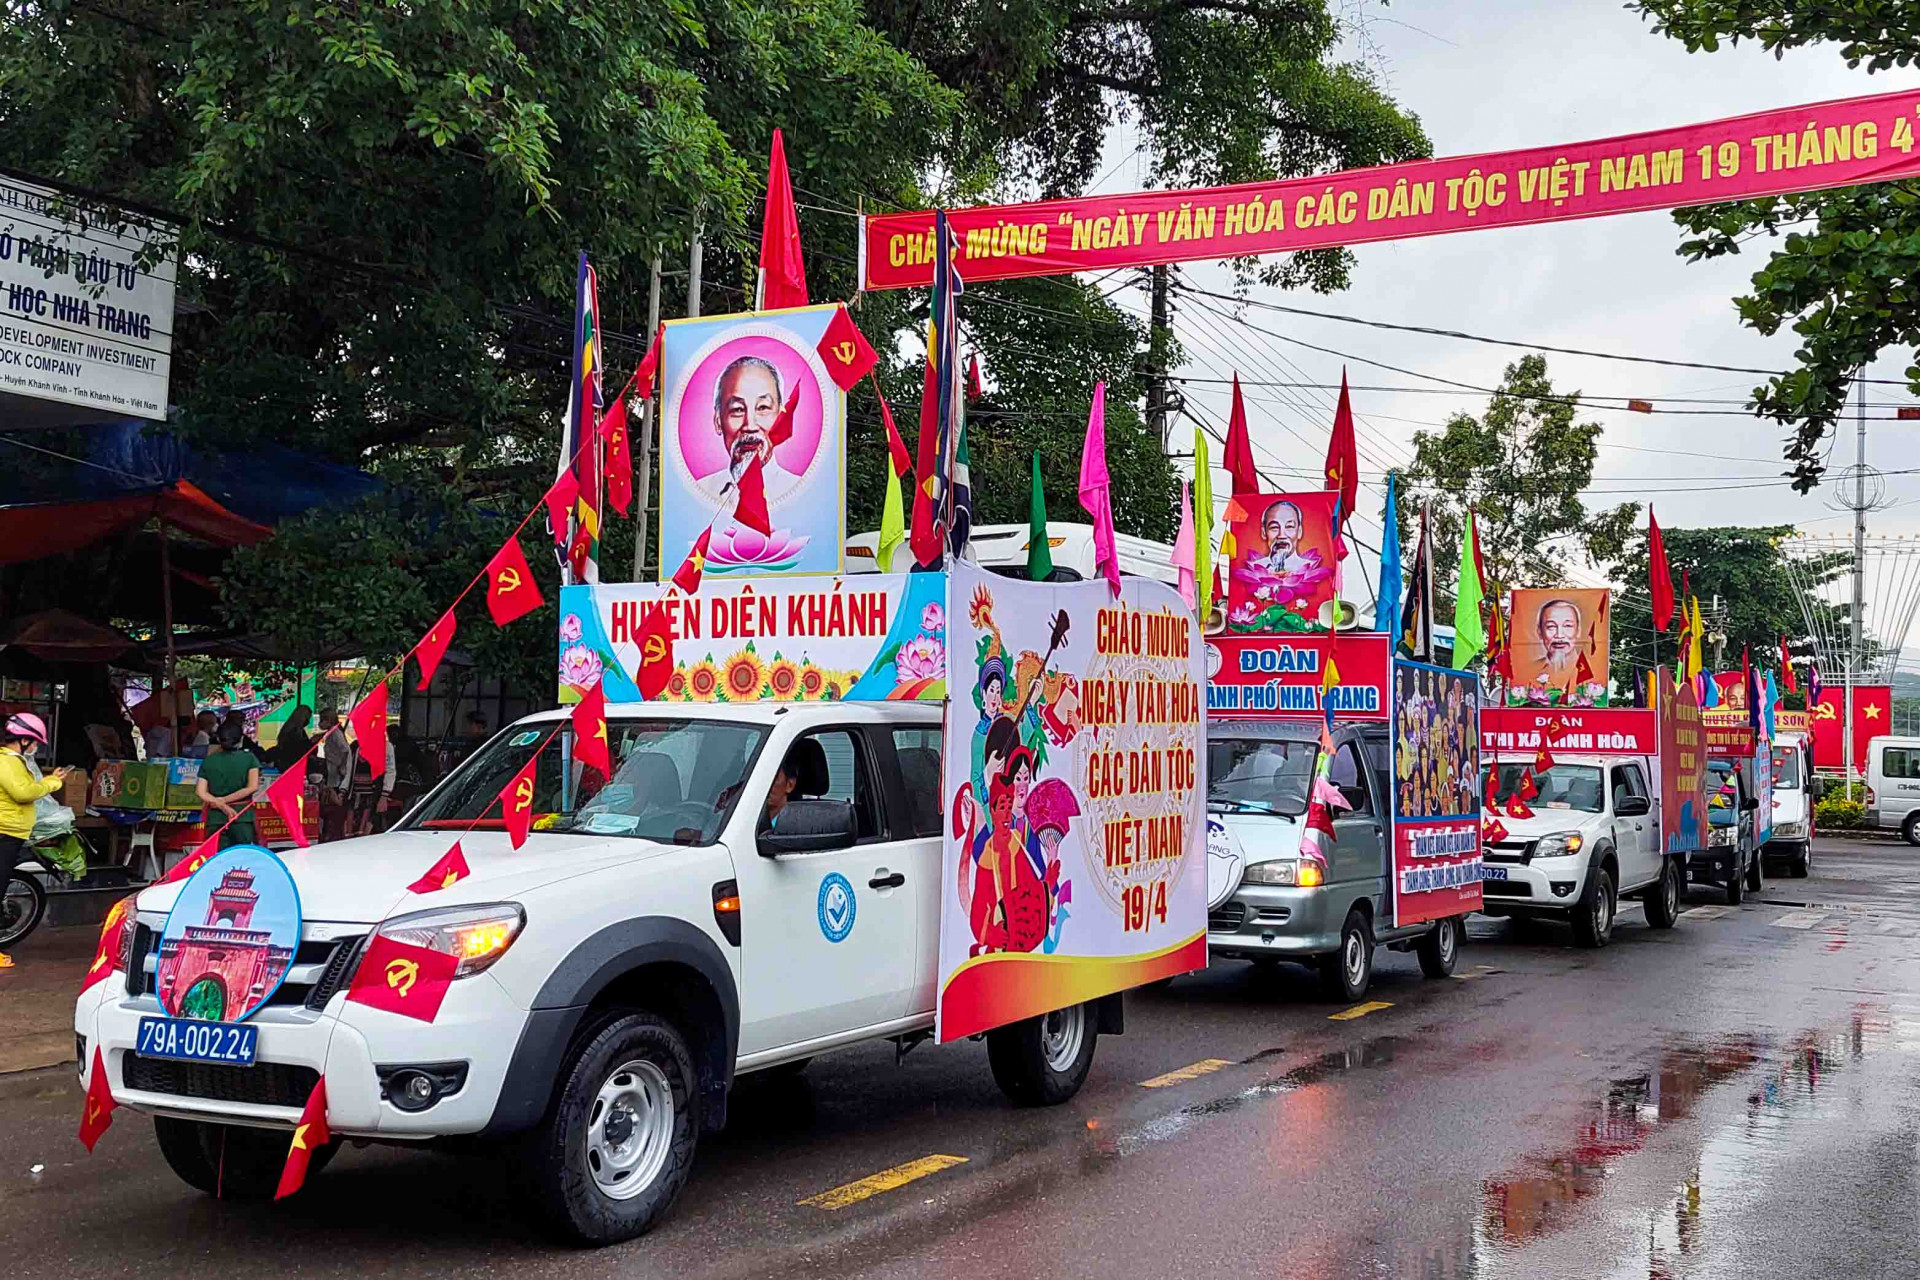 Parade of decorated propaganda cars on some streets in Khanh Vinh District